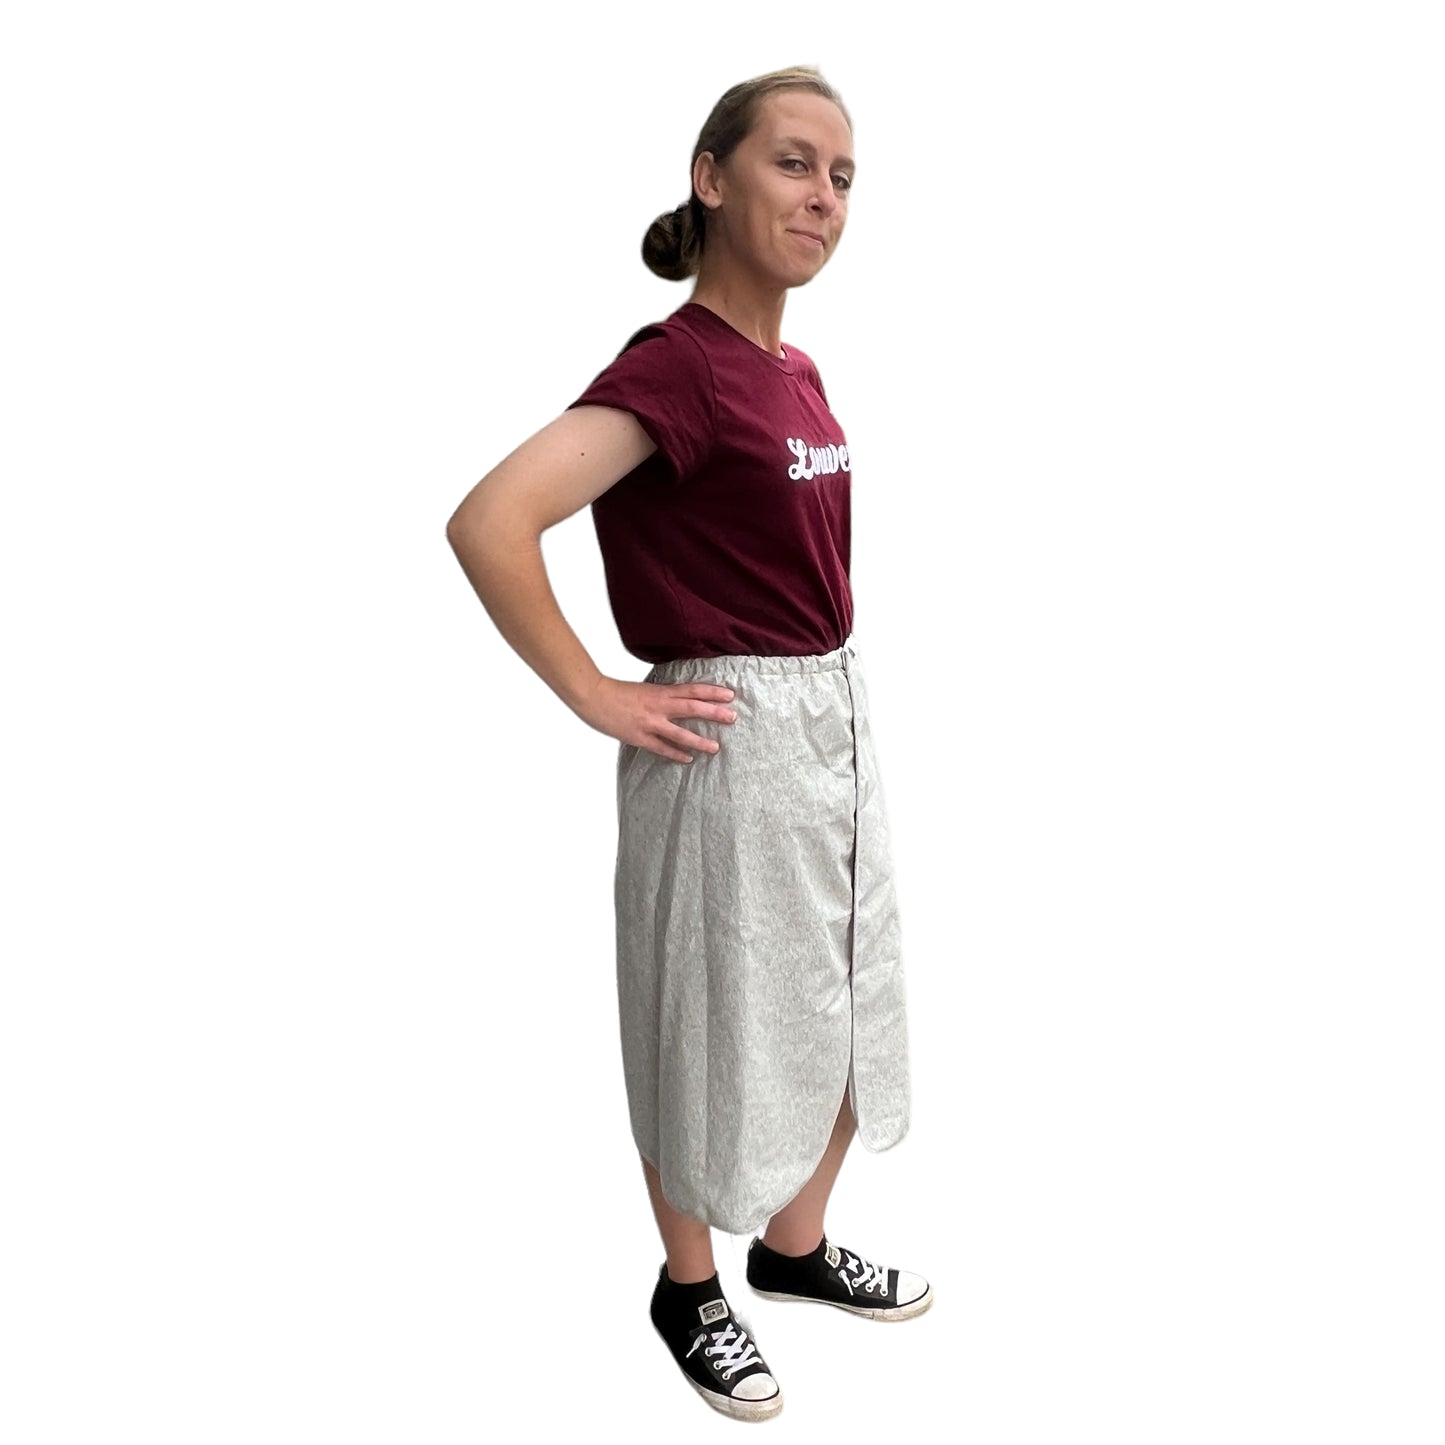 Adult Waterproof Continence Skirt (Snaps)